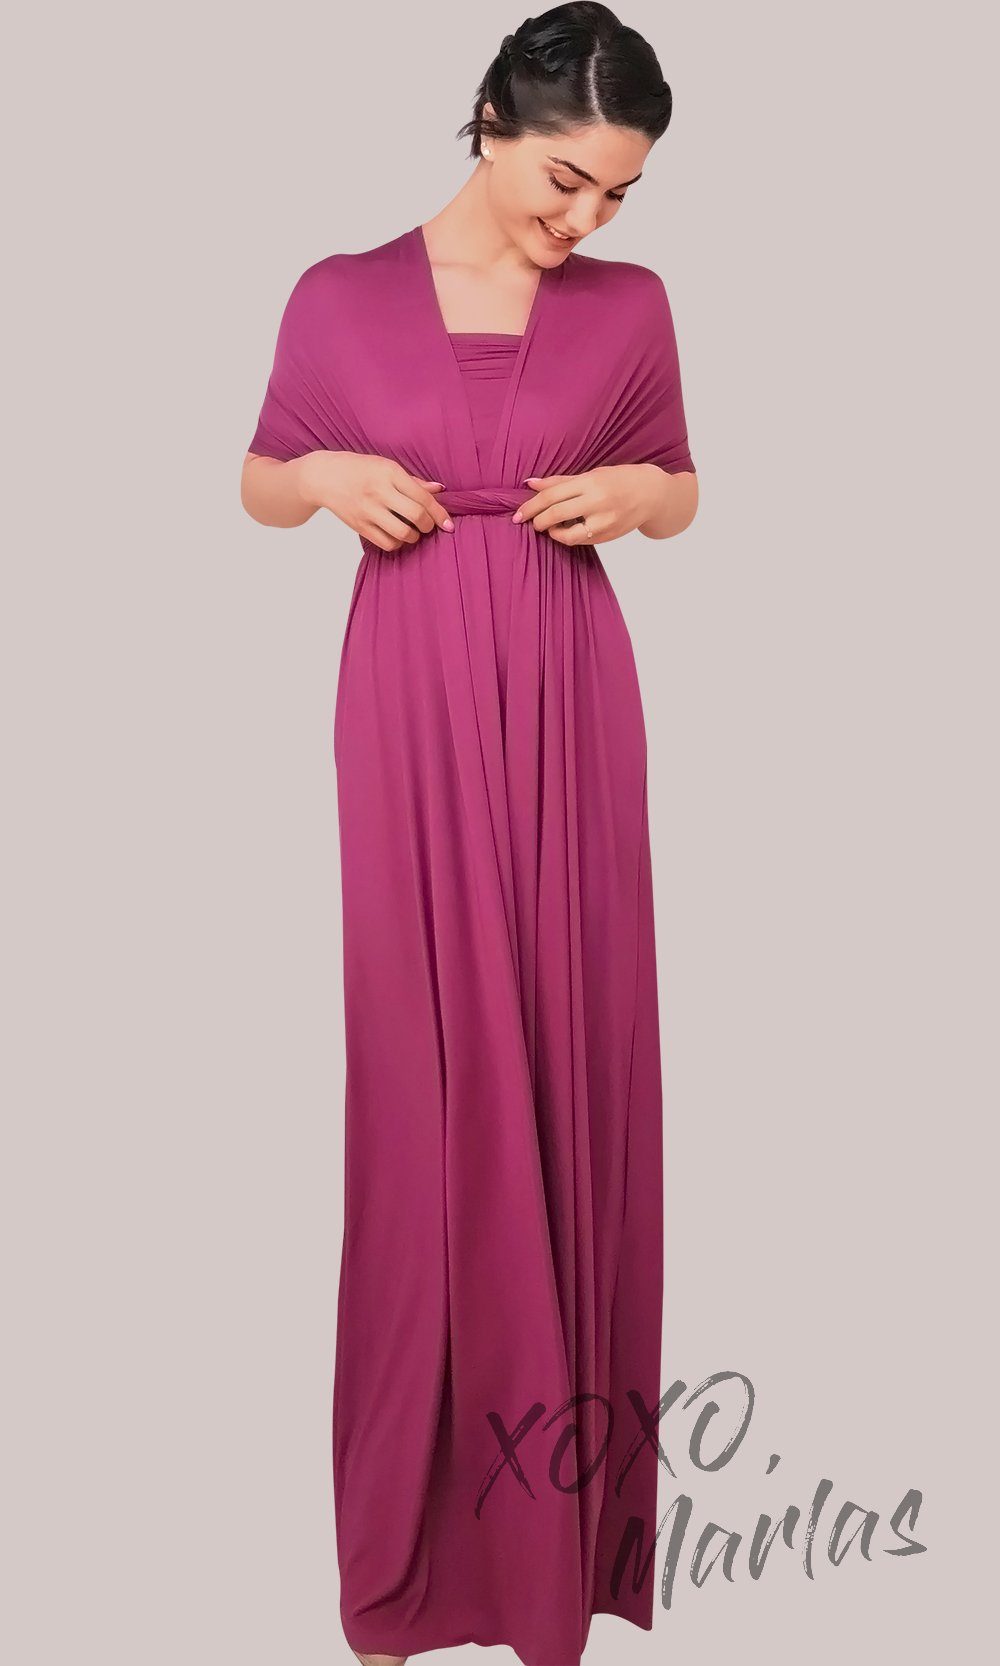 Long purple pink infinity bridesmaid dress or multiway dress or convertible dress.One dress worn in multiple ways.This magenta one size dress is great for bridesmaid, prom, destination wedding, gala, cheap western party dress, cocktail, semi formal